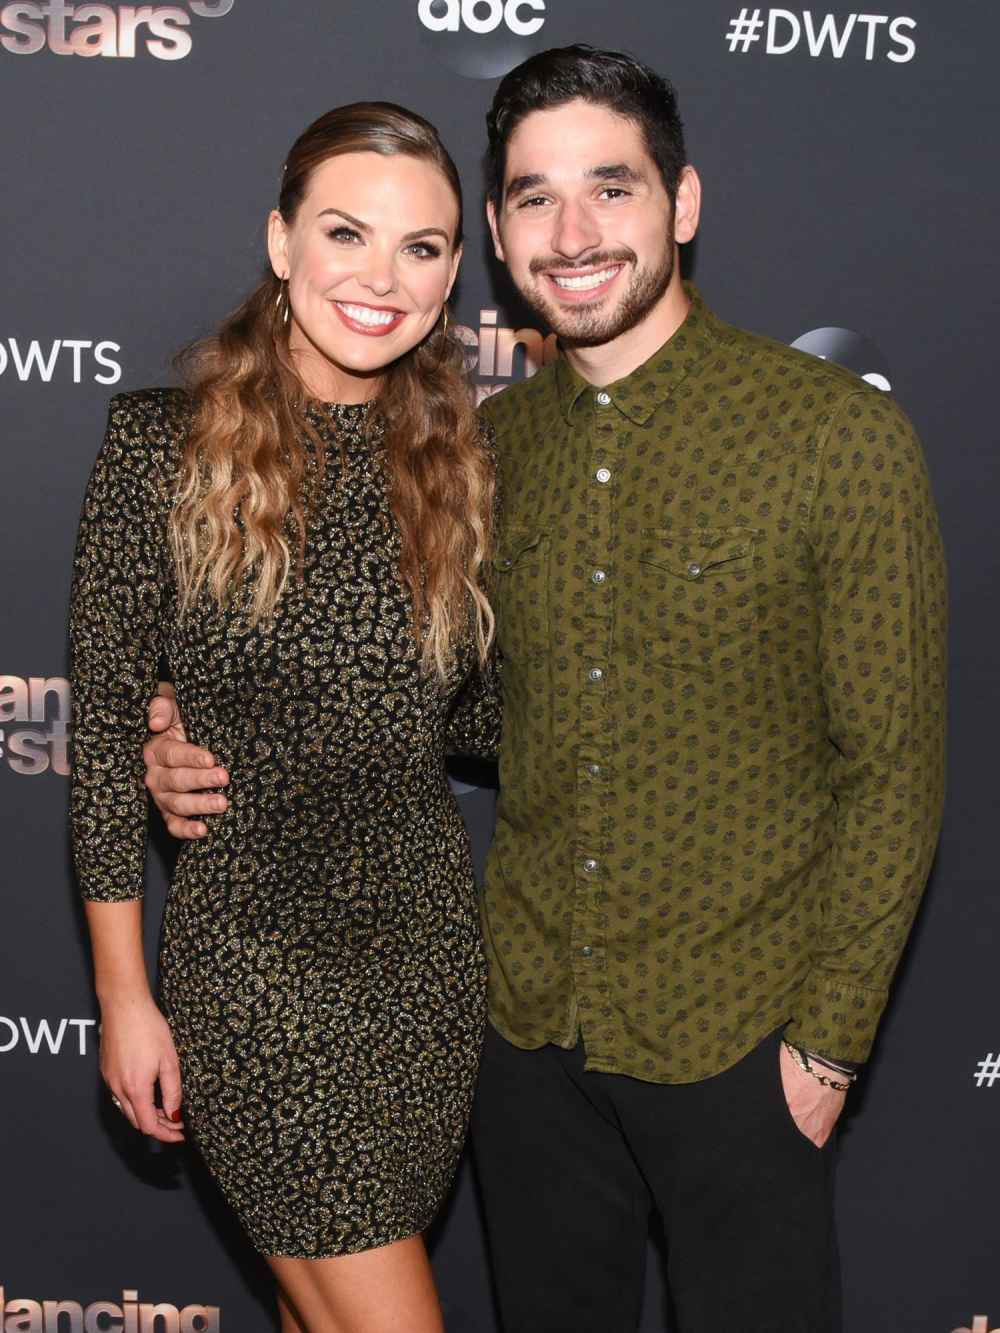 Alan Bersten Compares 'DWTS' Partner Hannah Brown to a 'Female Version' of Himself